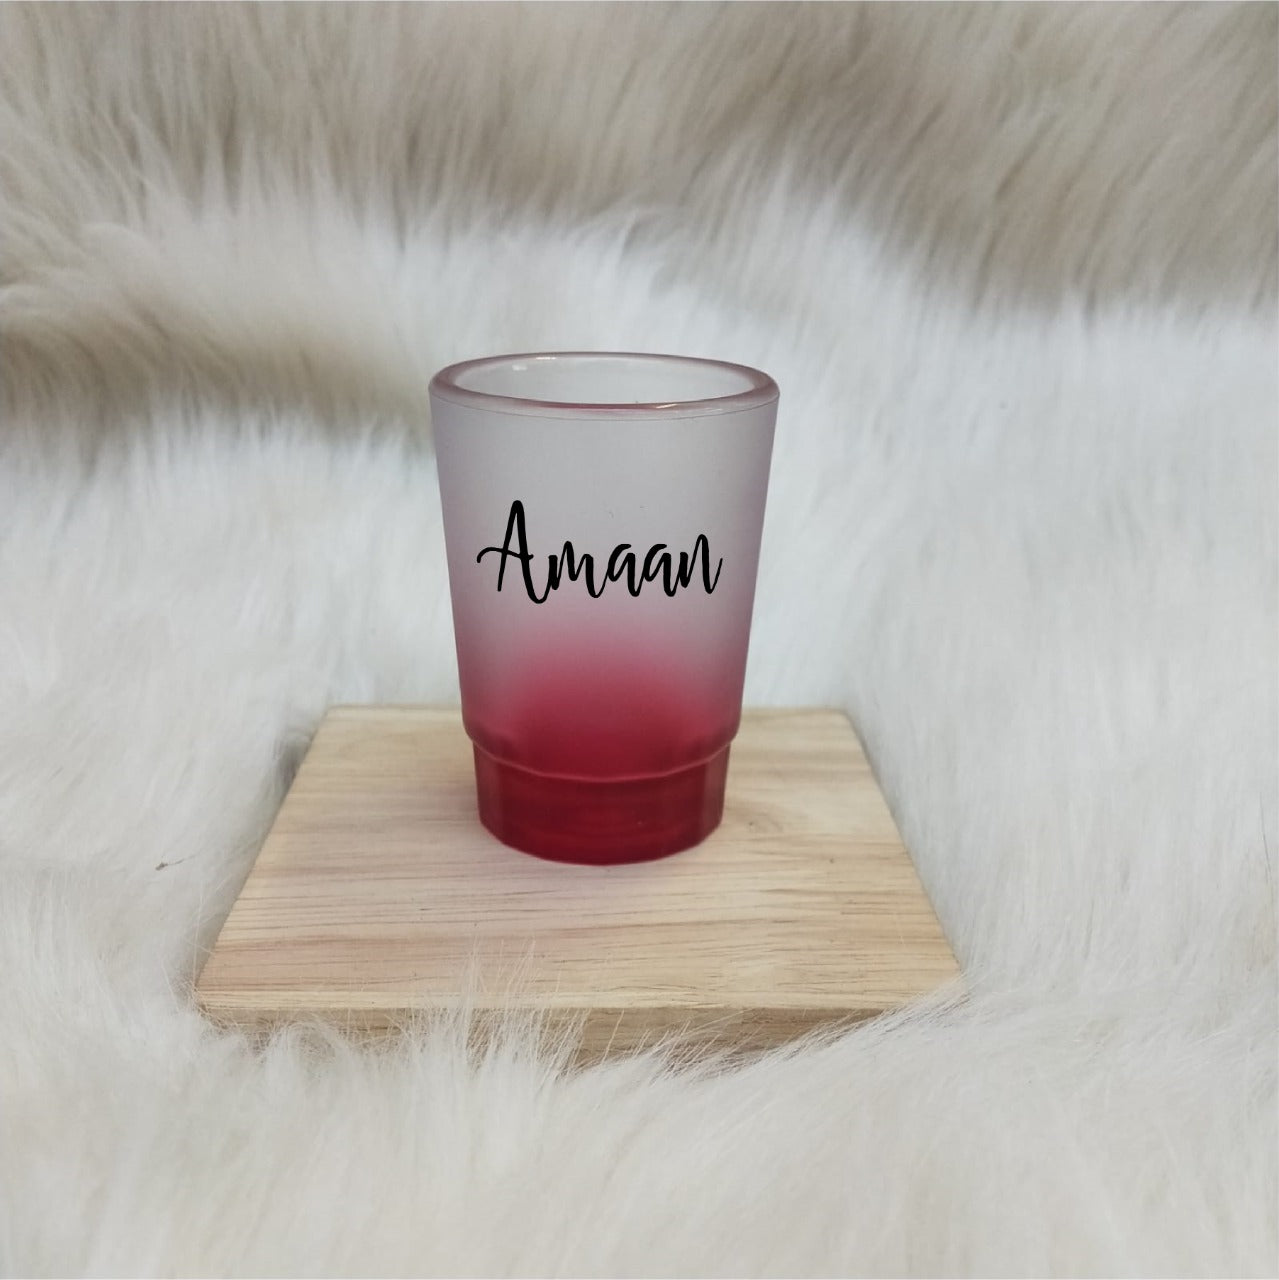 Unbreakable Shot Glass with Customisable Name - Set of 1